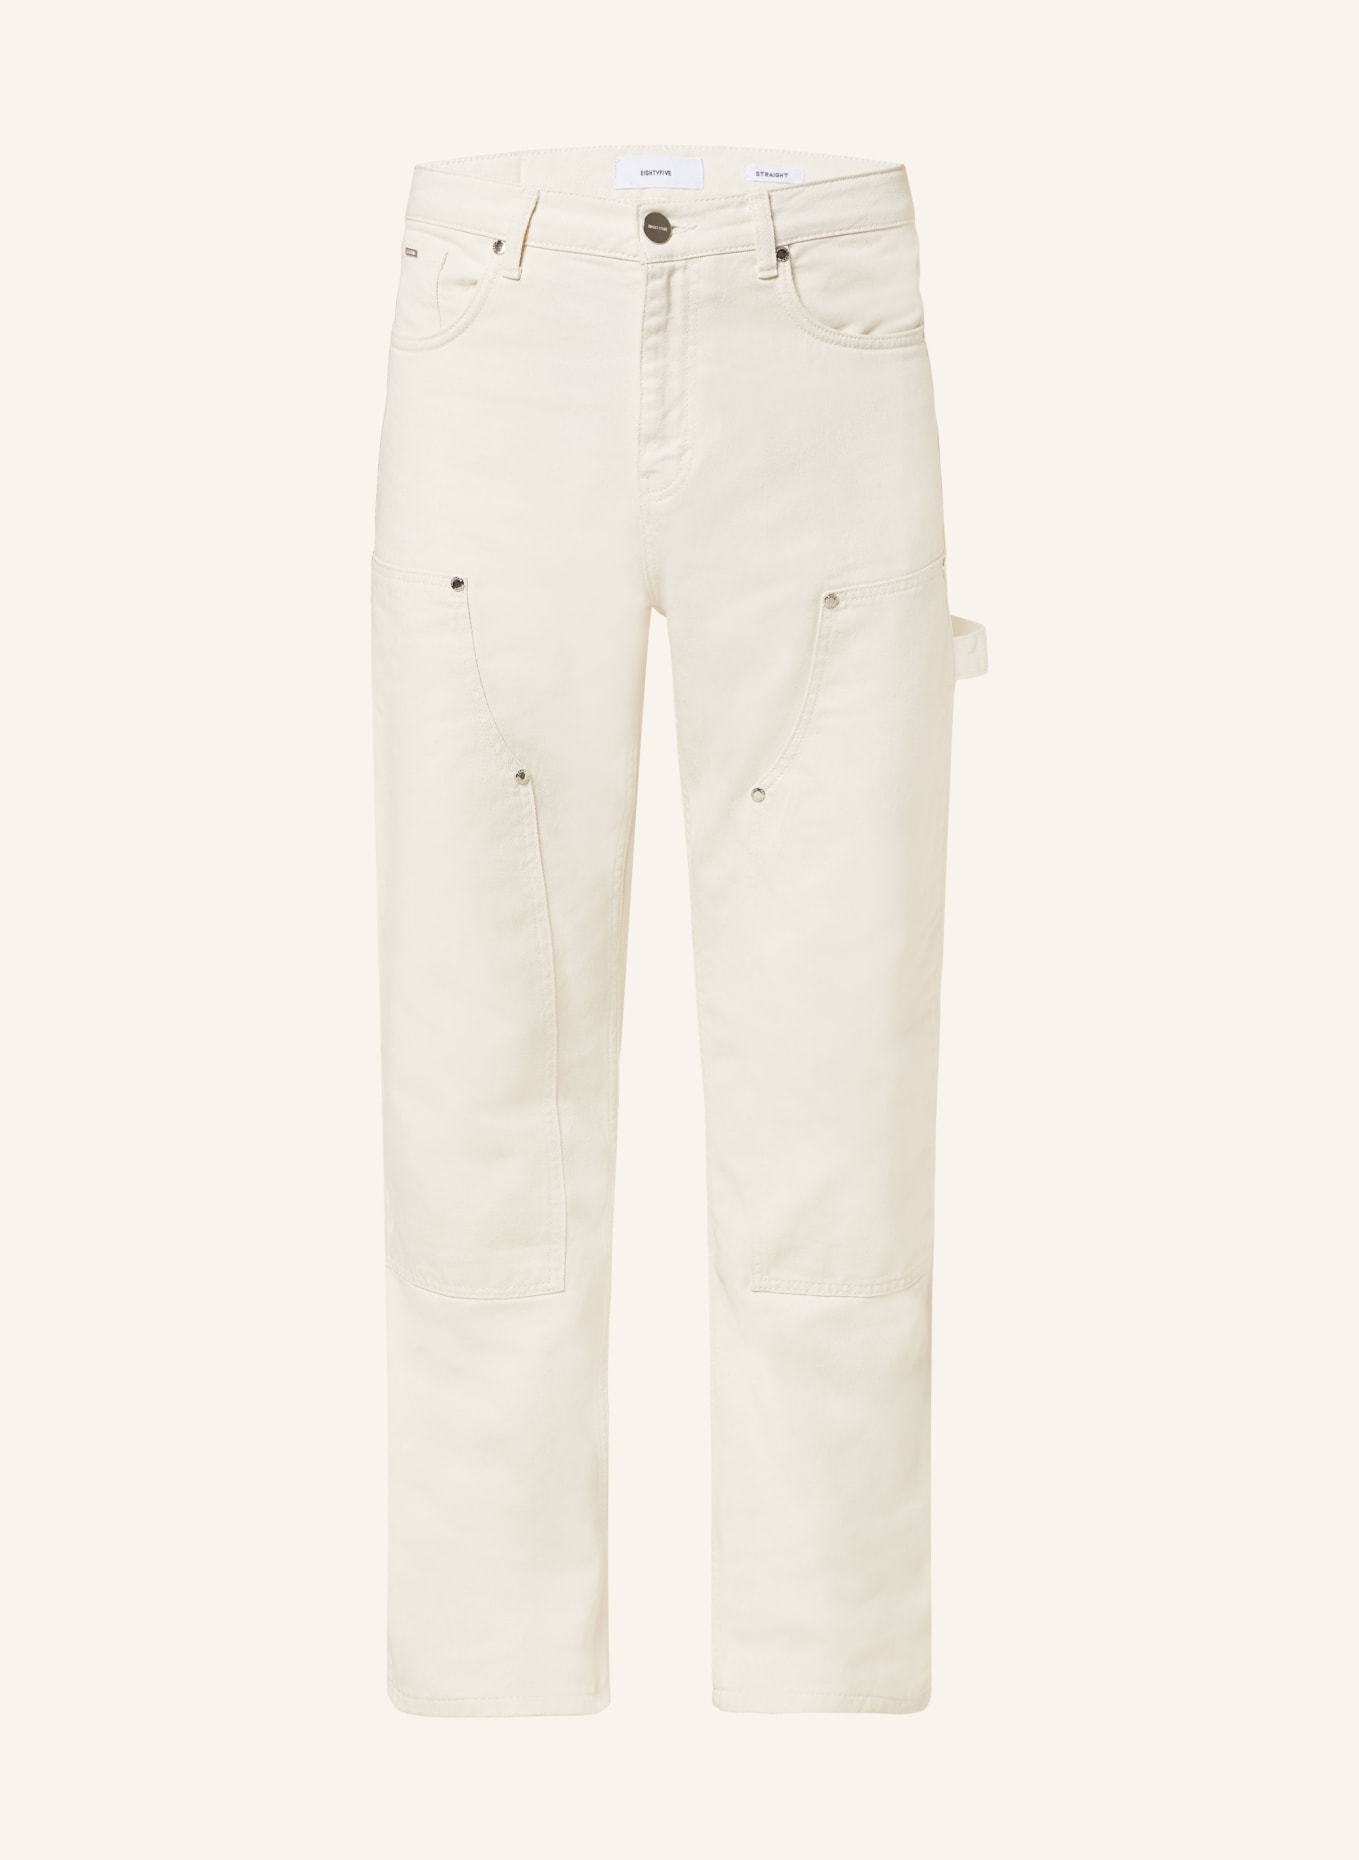 EIGHTYFIVE BAGGY PANTS - Cargo trousers - off white/off-white